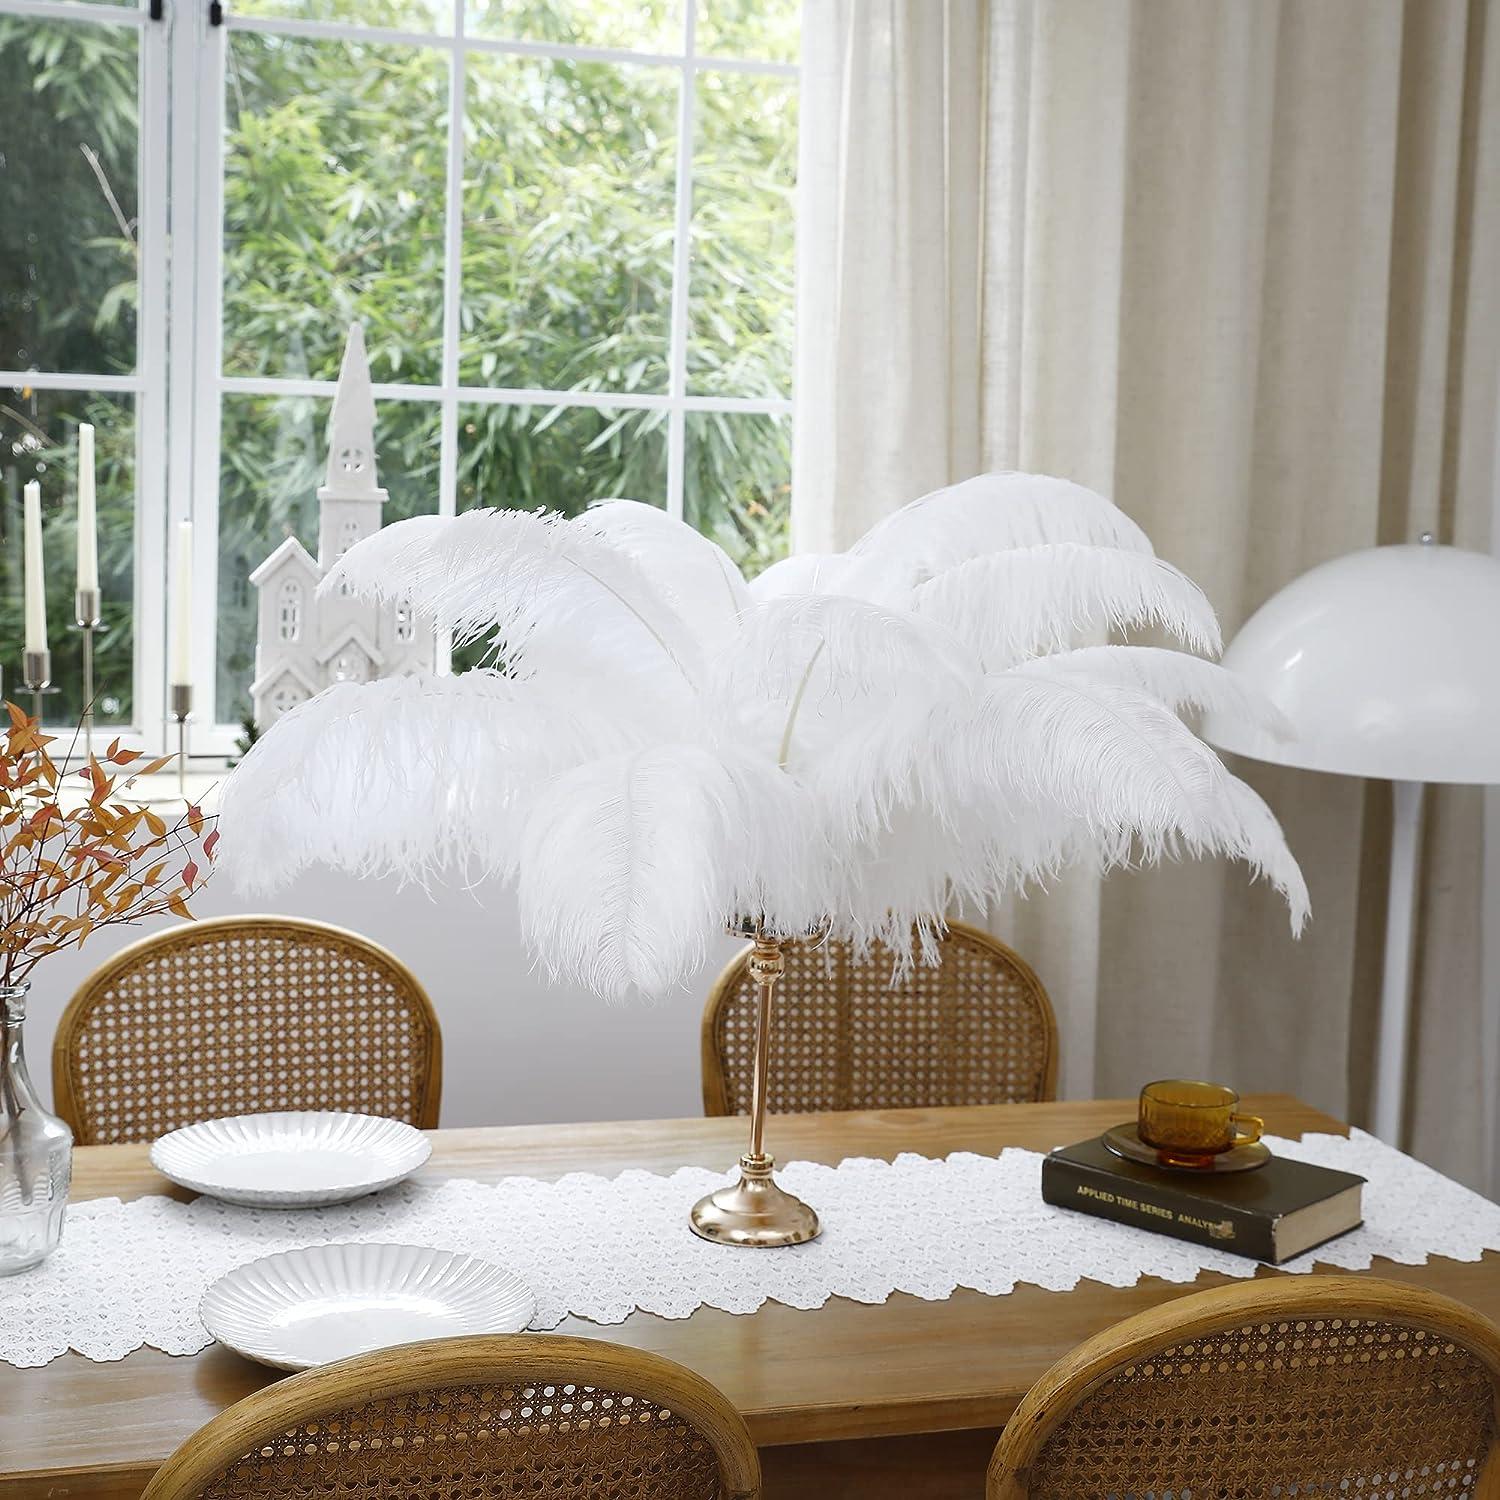 Larryhot 16-18inch Ostrich Feathers Plumas - 10pcs Boho Feathers for Vase Decoration,Wedding Party Centerpieces and Home Decorations (Champagne)